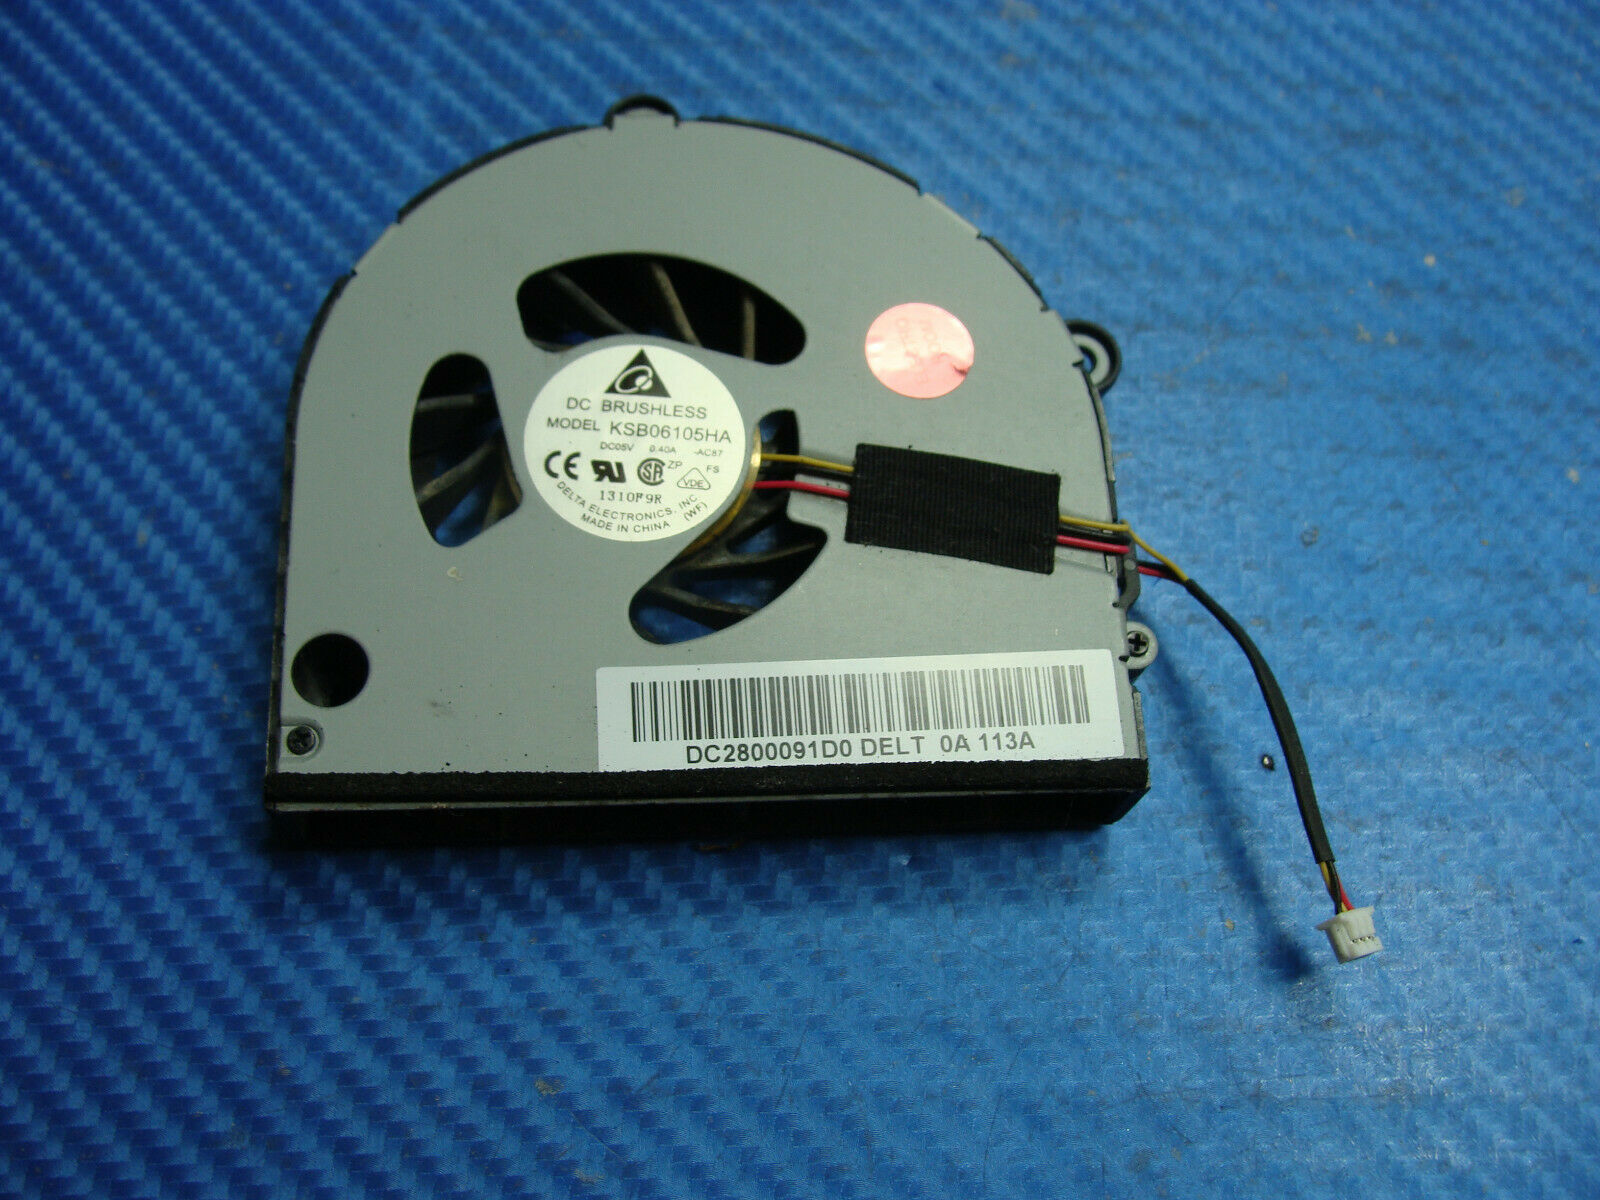 Toshiba Satellite A665-S5186 15.6" Genuine Laptop CPU Cooling Fan DC2800091D0 Toshiba